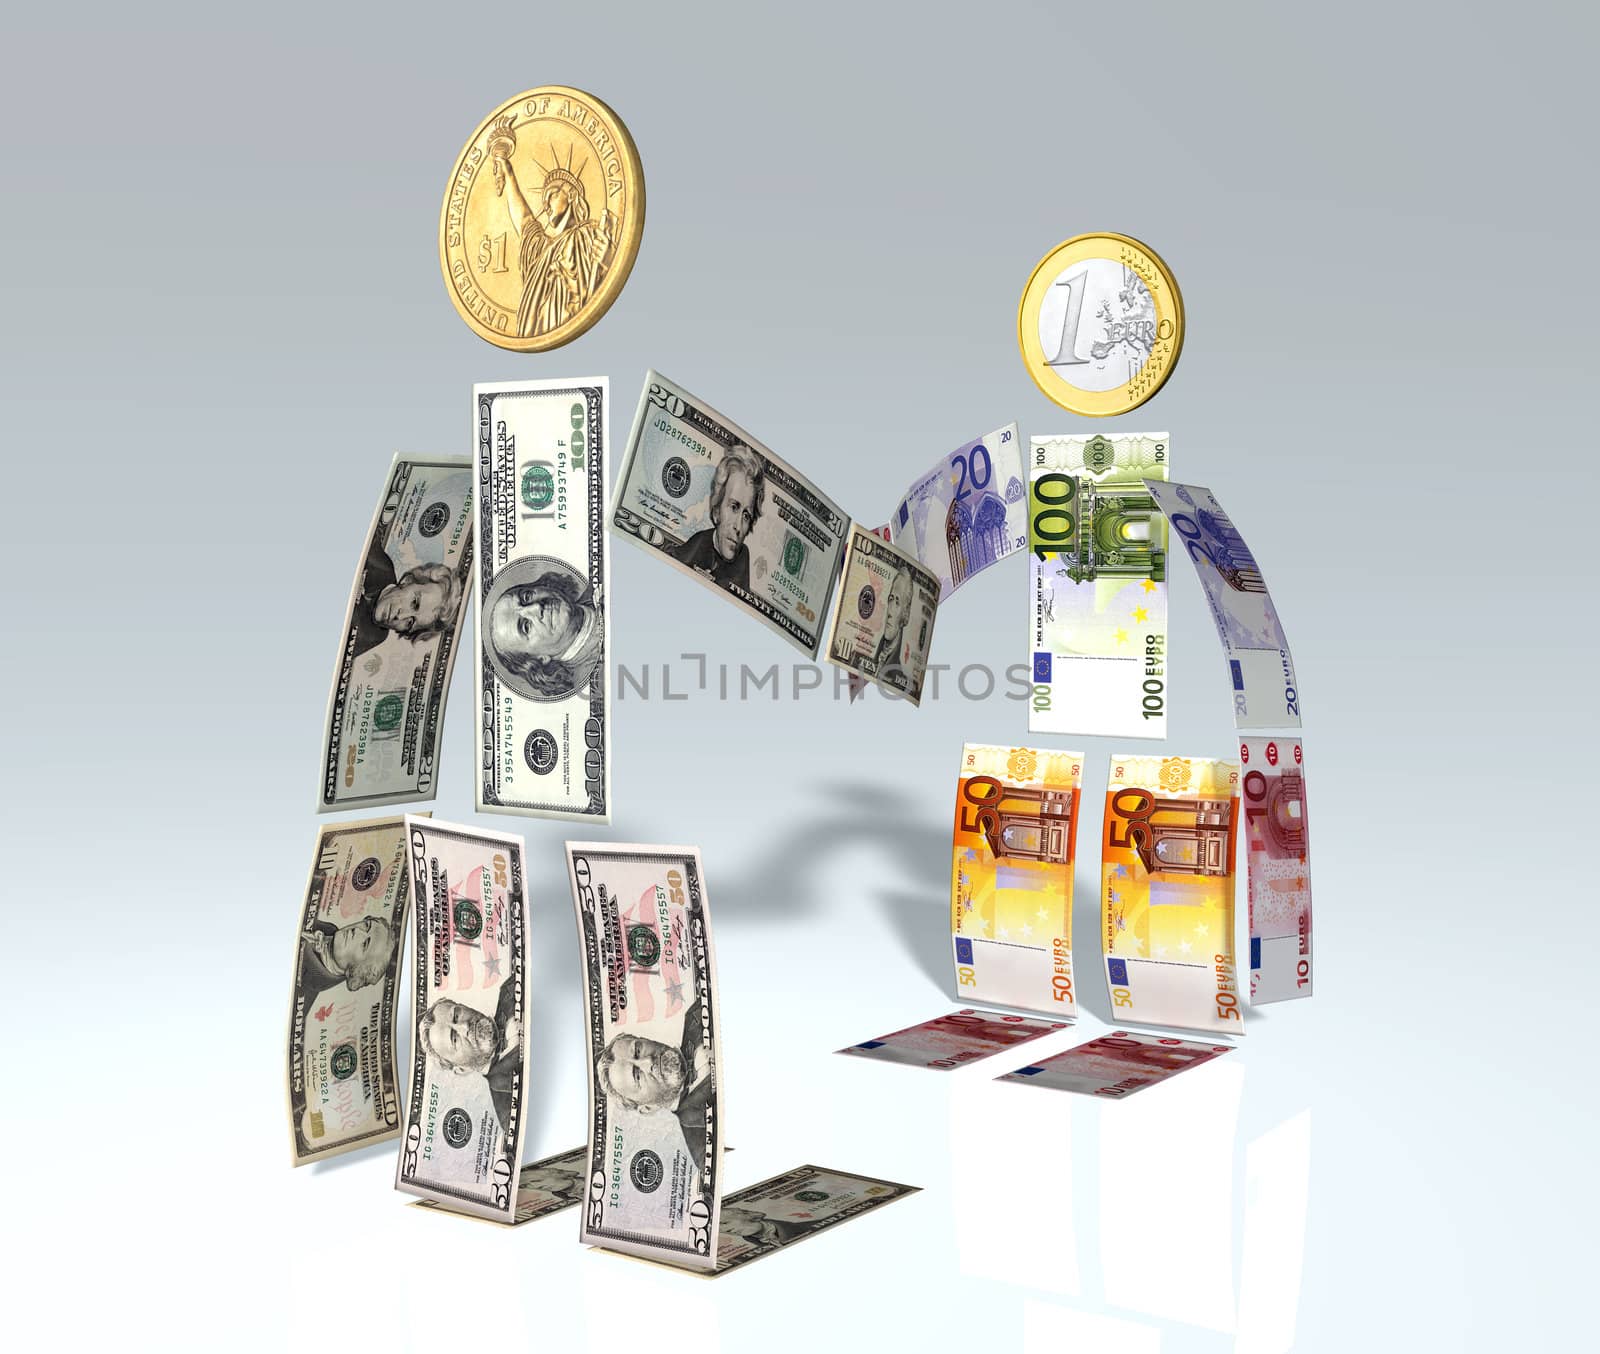 a man made of u.s. dollar banknotes and coin is shaking hands with another man made of euro banknotes and coin